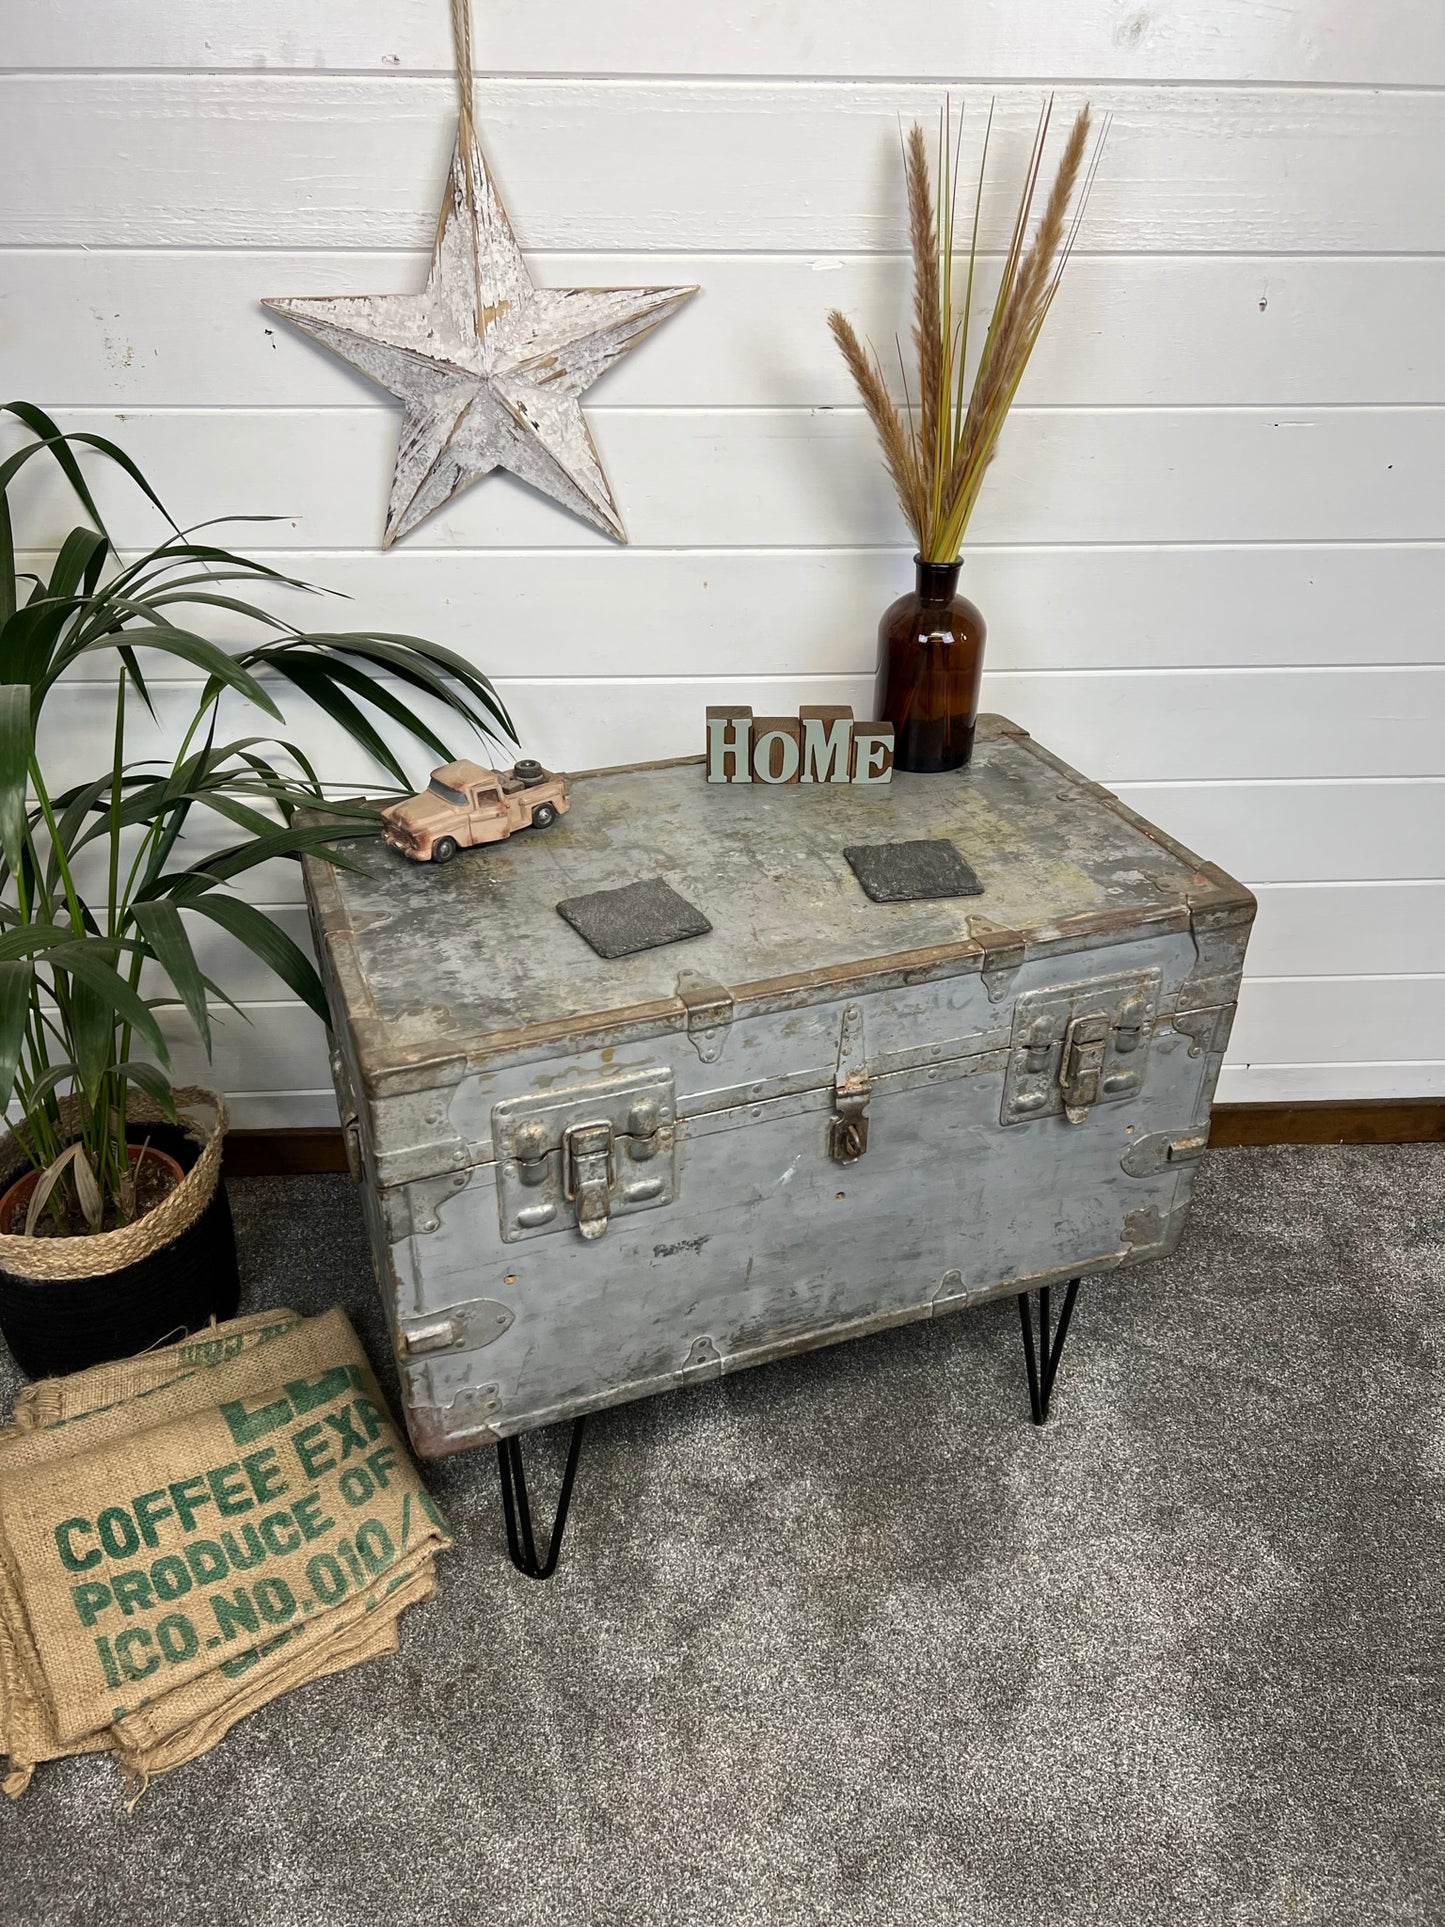 Vintage Industrial Chest Trunk Table Reclaimed Large Coffee Side Table Blanket Box Rustic Steampunk Storage